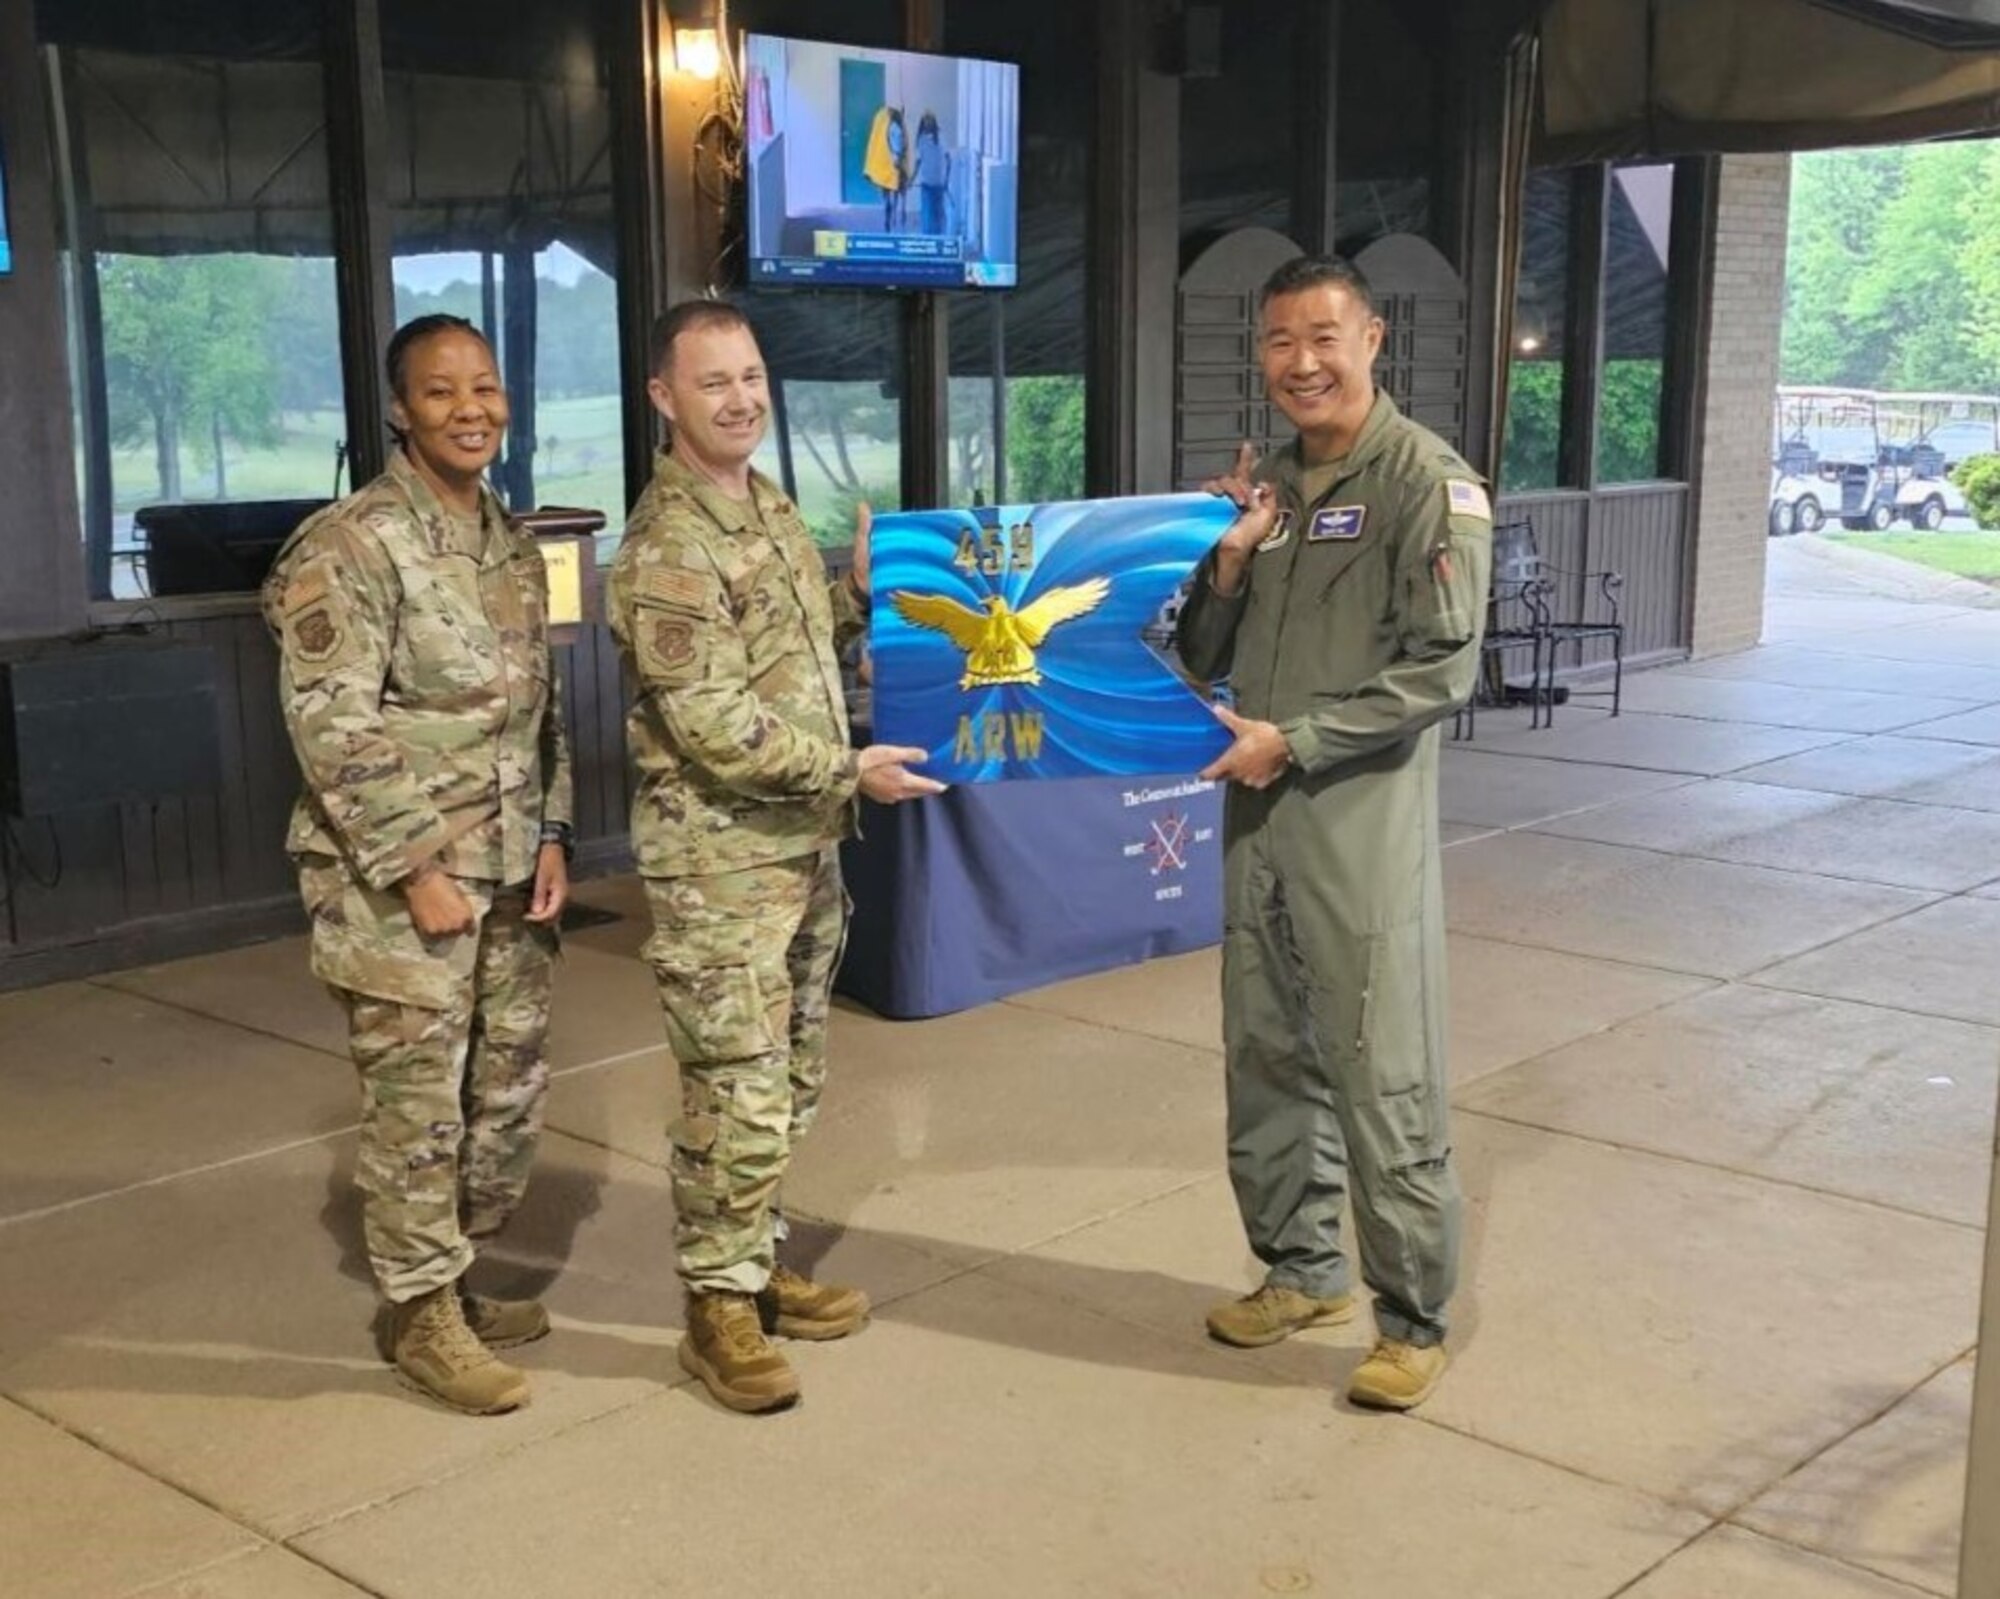 The 459th Air Refueling Wing Deputy Commander, Col. Roland Tsui leaves to become the Mobilization Assistant to the Director of Strategy, Plans, Programs, and Requirements at Pacific Air Forces.